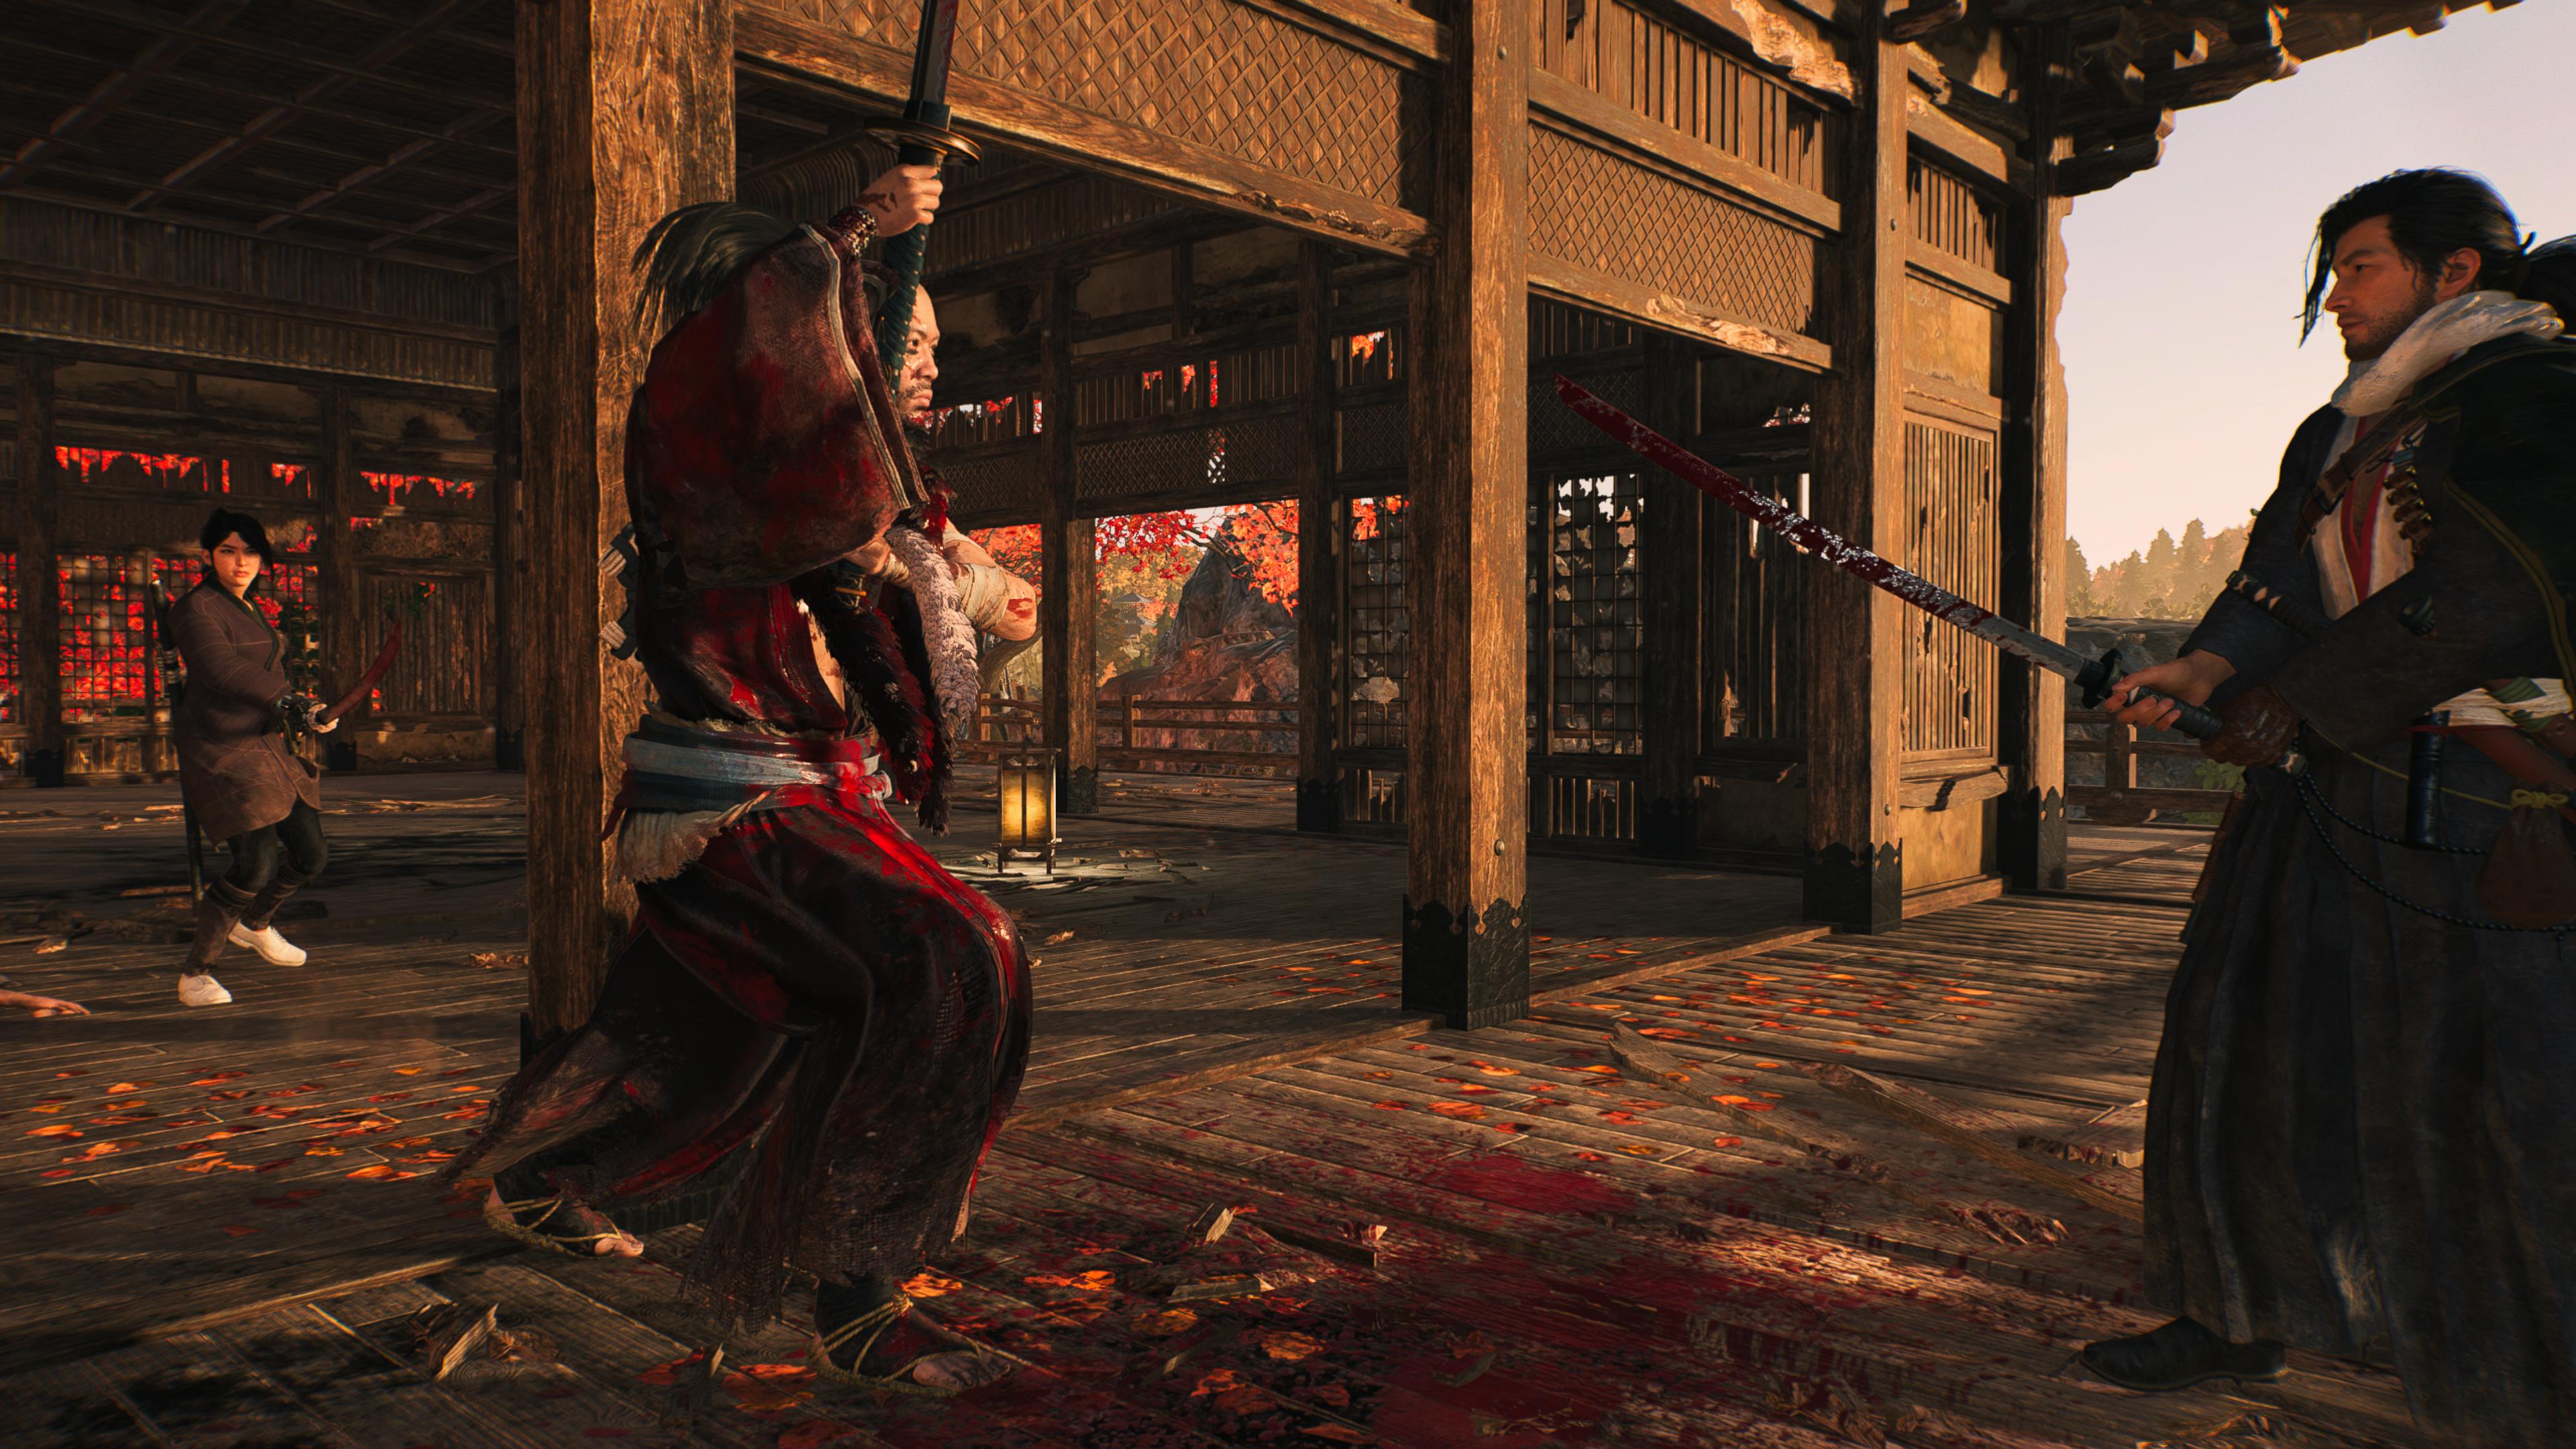 Reseña: Rise of the Ronin, ¿Vale la pena? 18